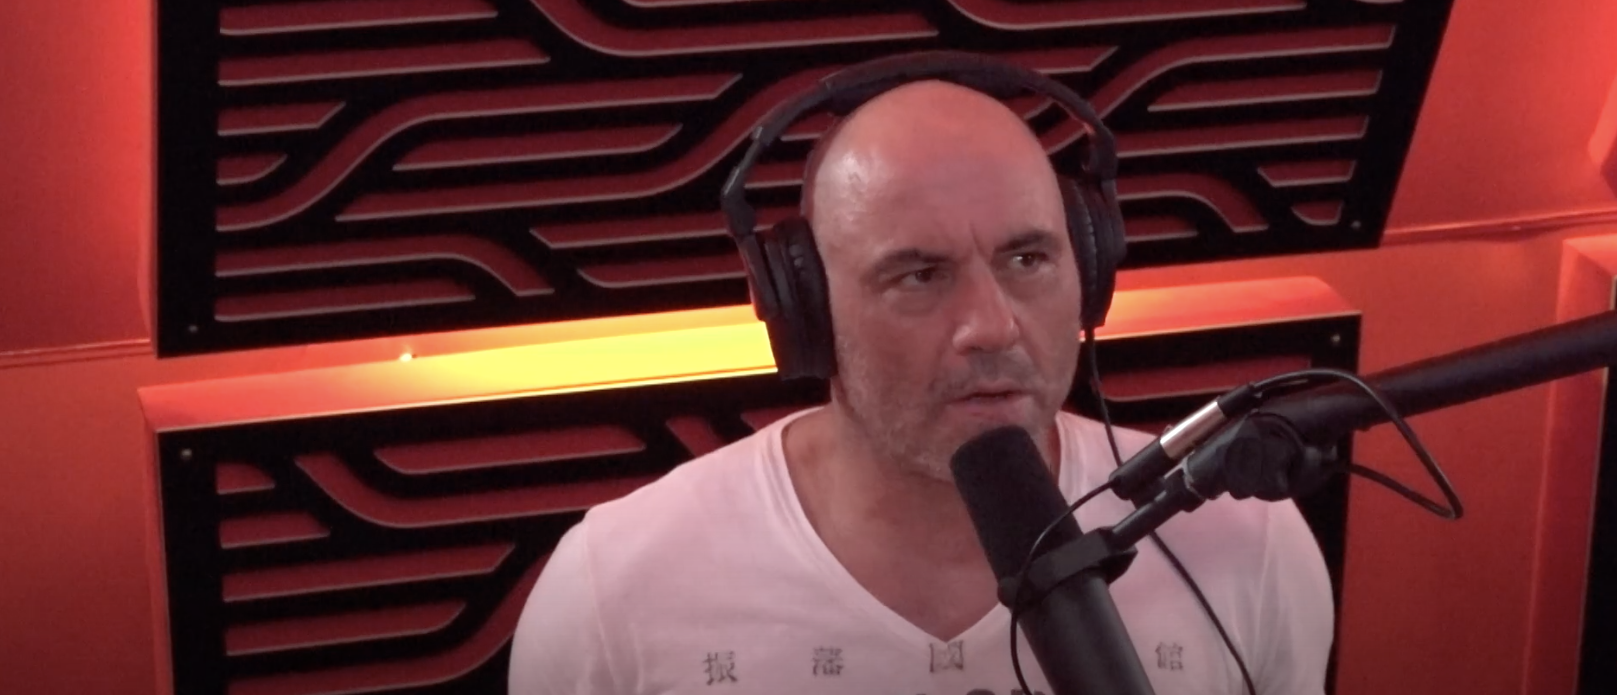 jre spotify contract